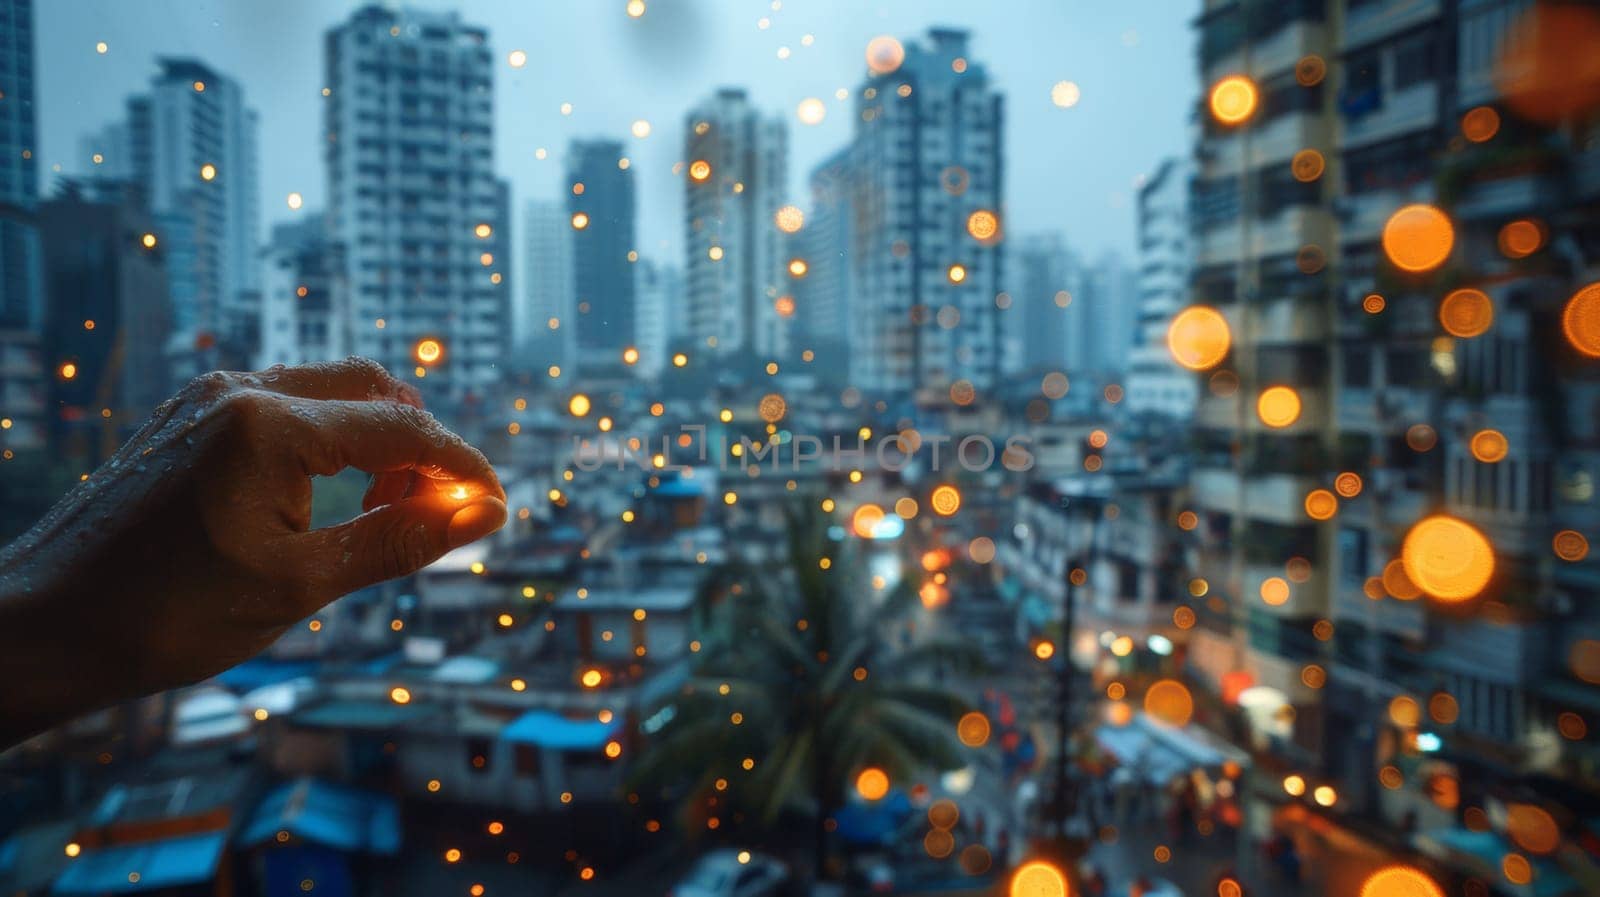 A person holding a lit up object in front of city lights, AI by starush